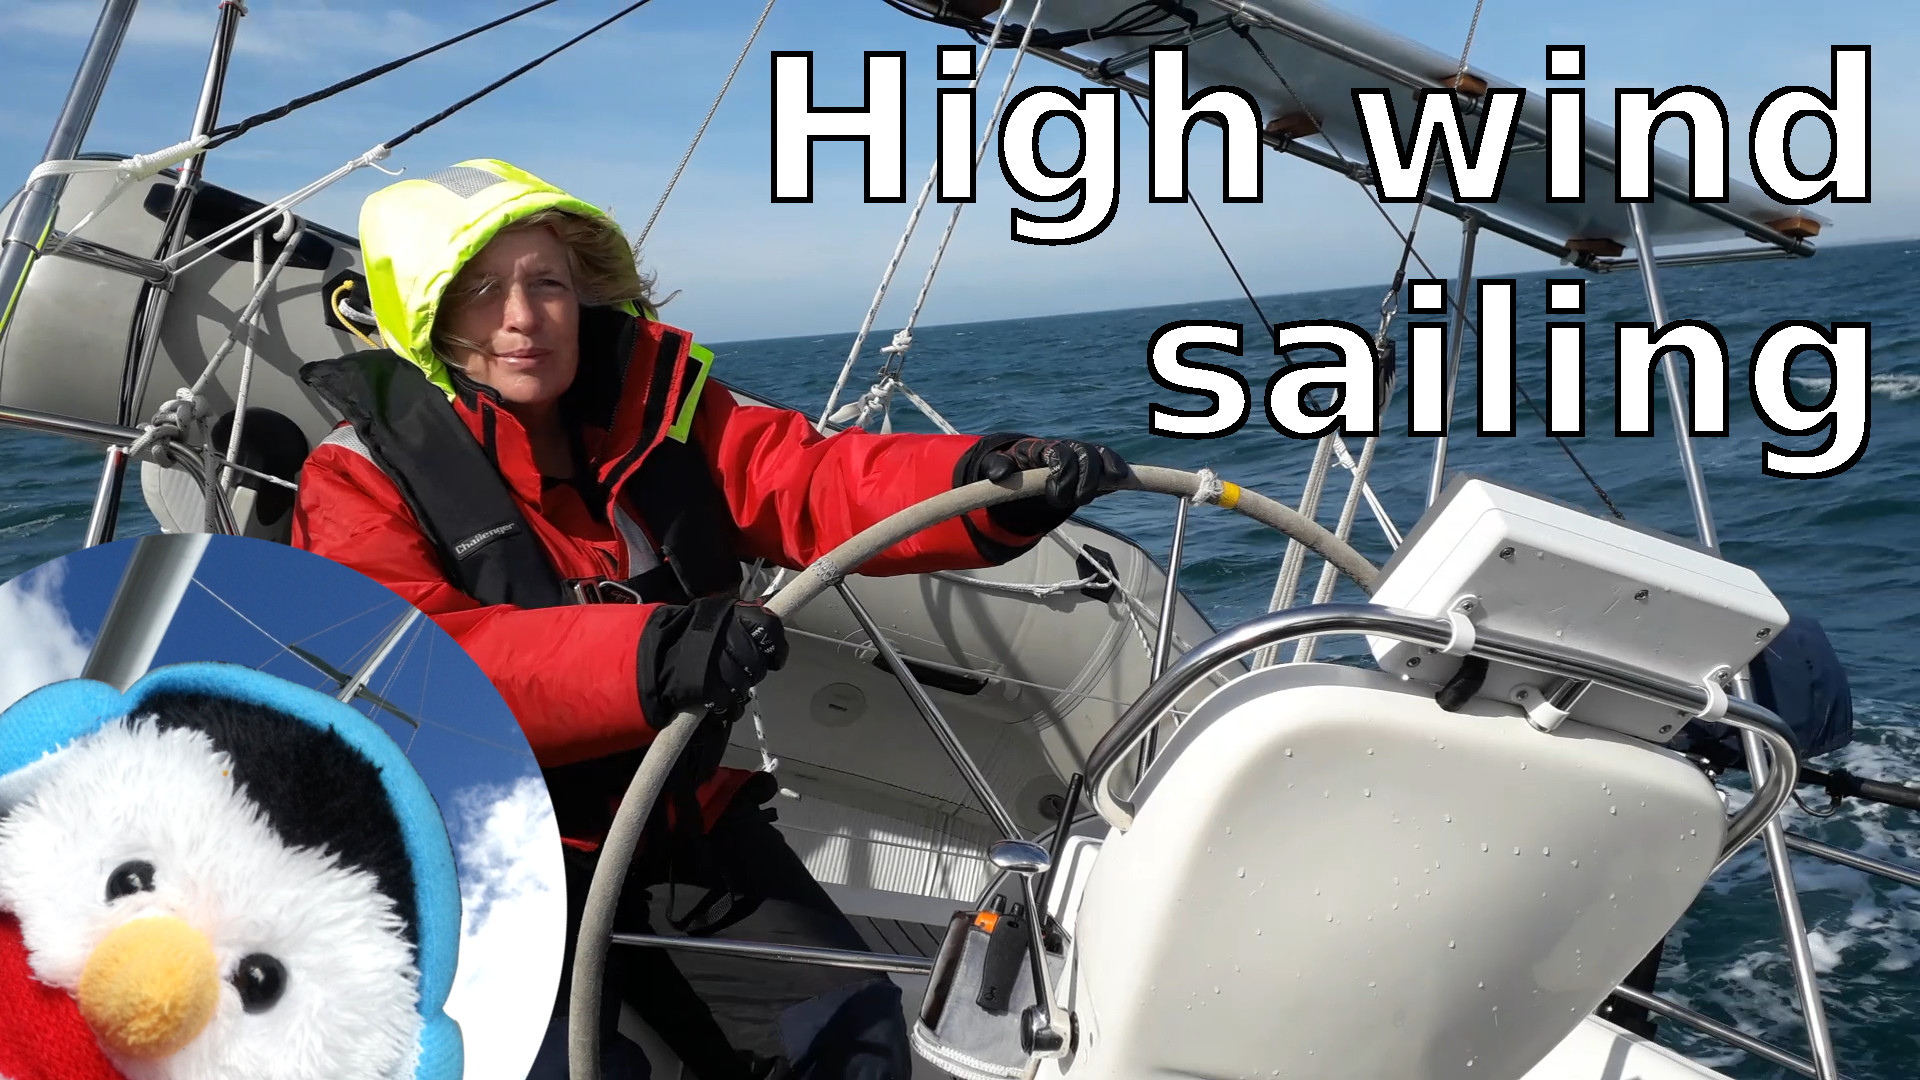 Watch our "High Winds sailing" episode and add commets etc.